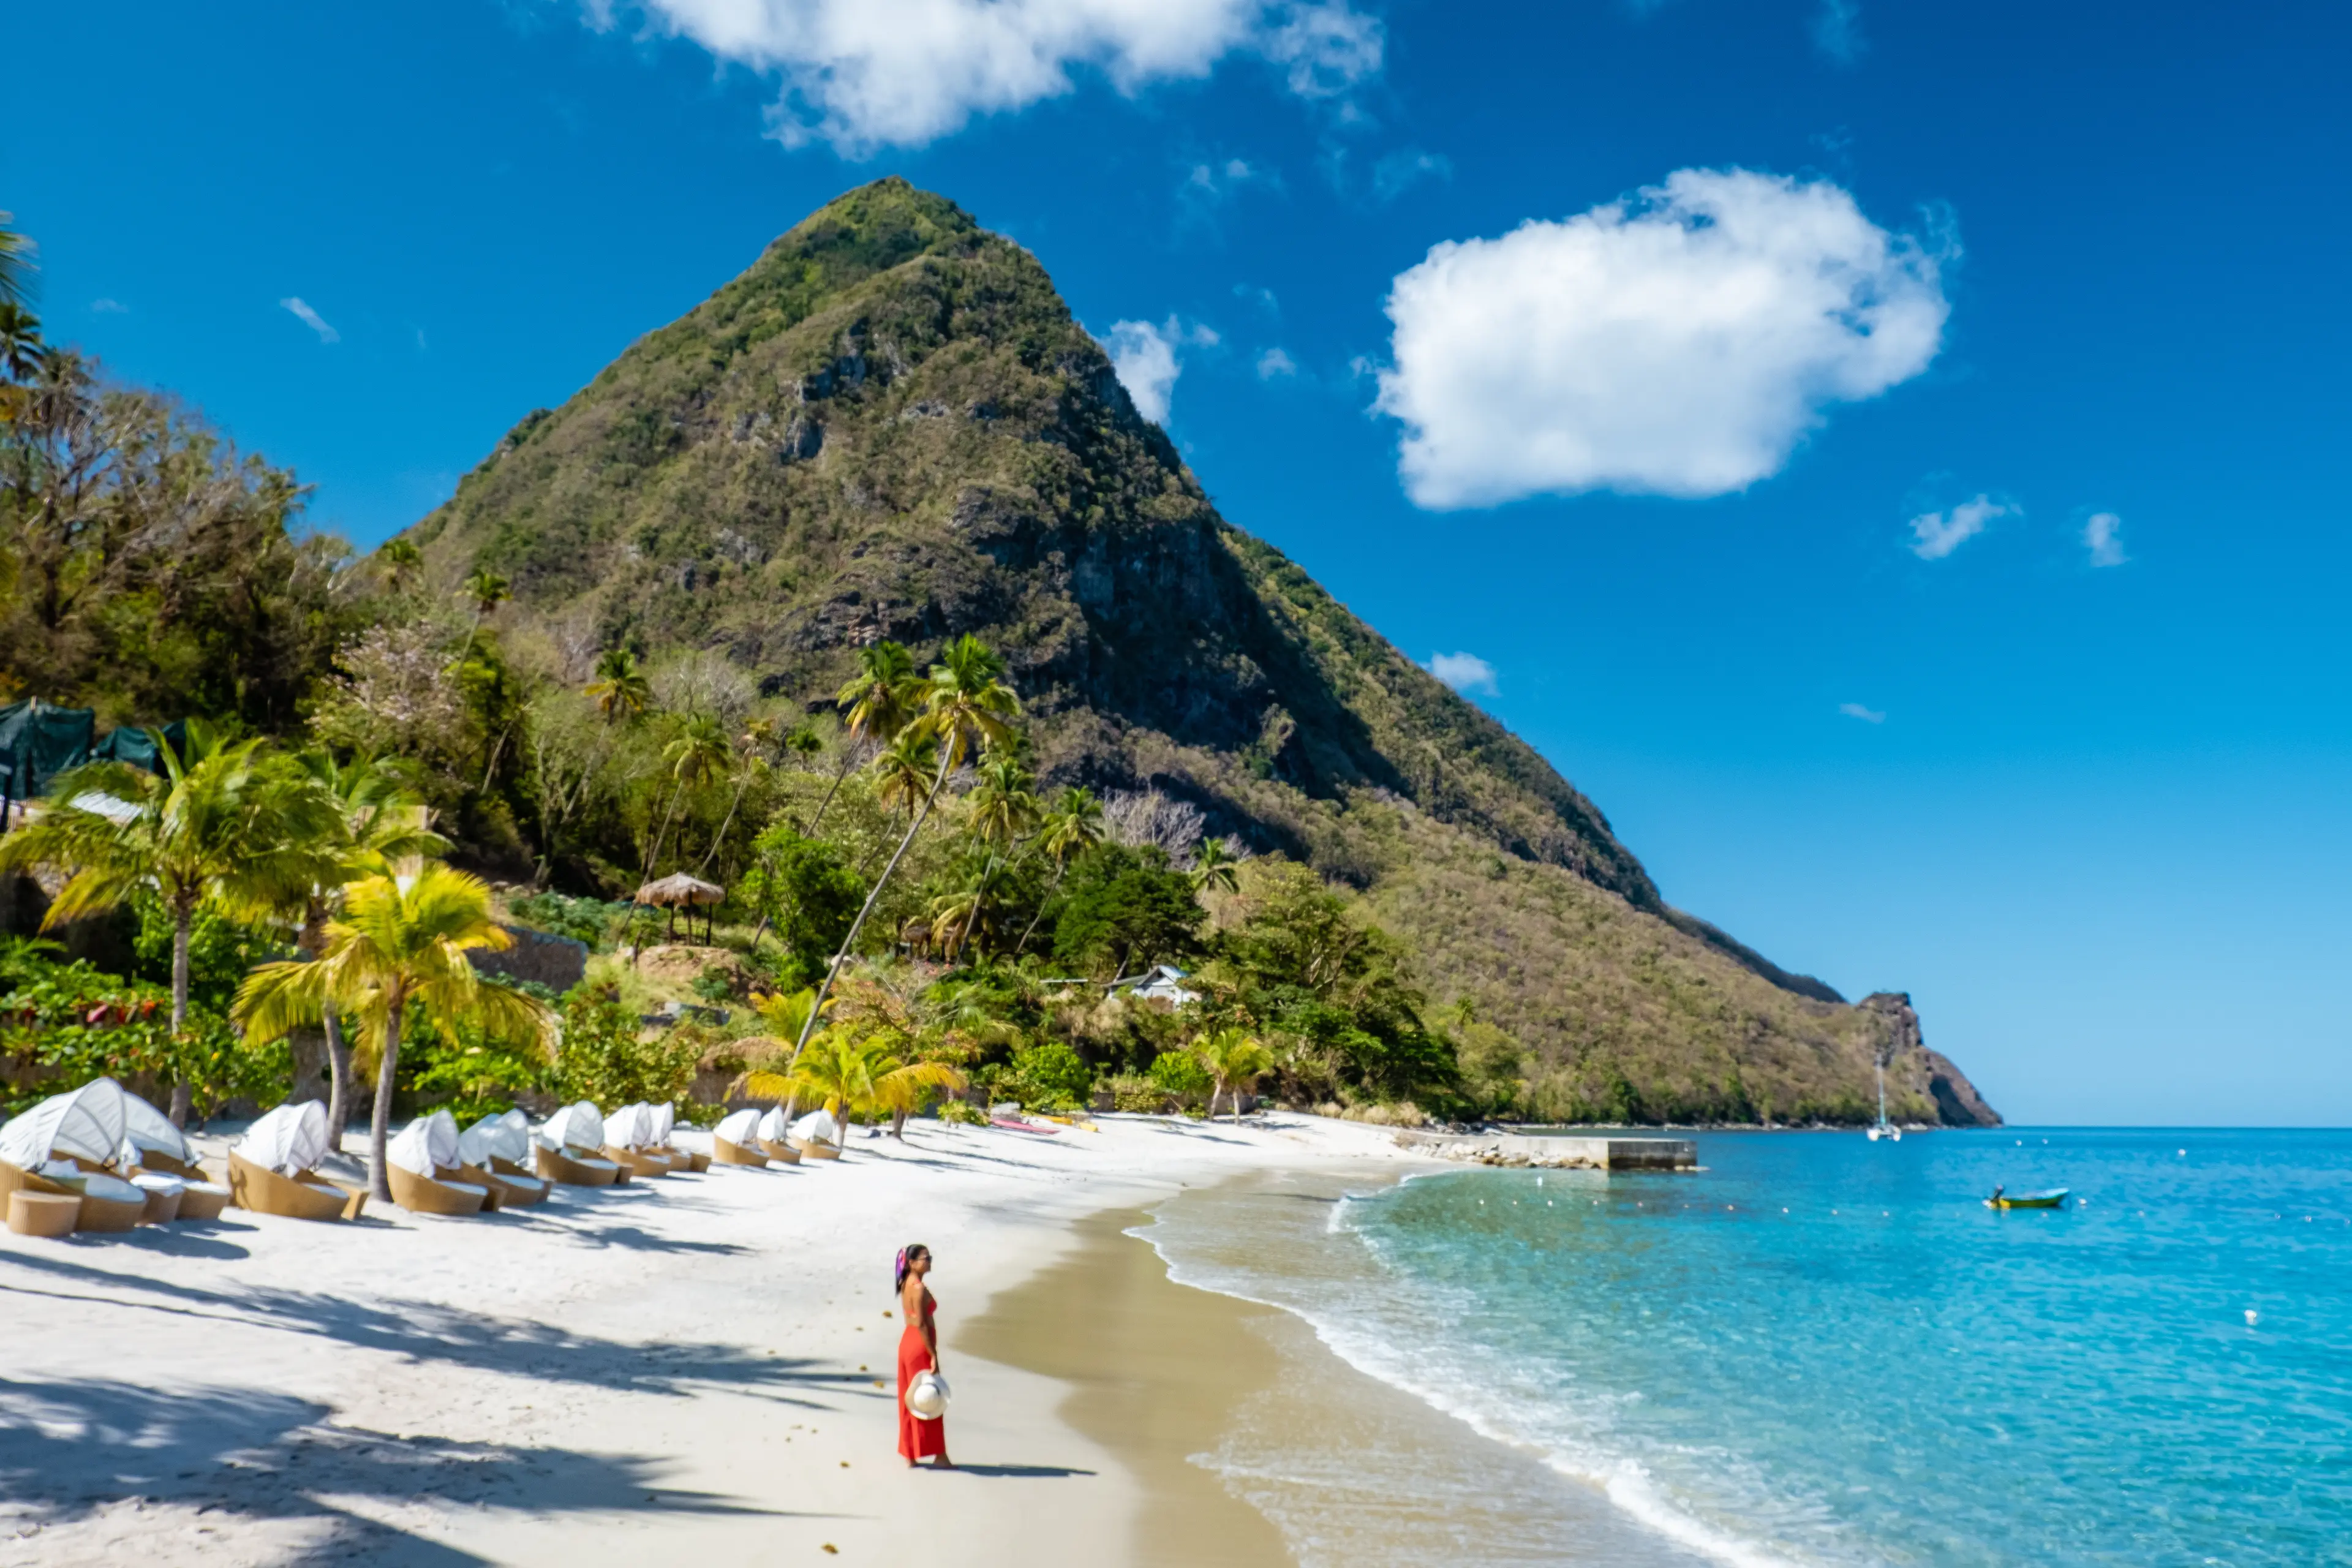 2-Day Local Flavor & Nightlife Trip to Saint Lucia with Friends